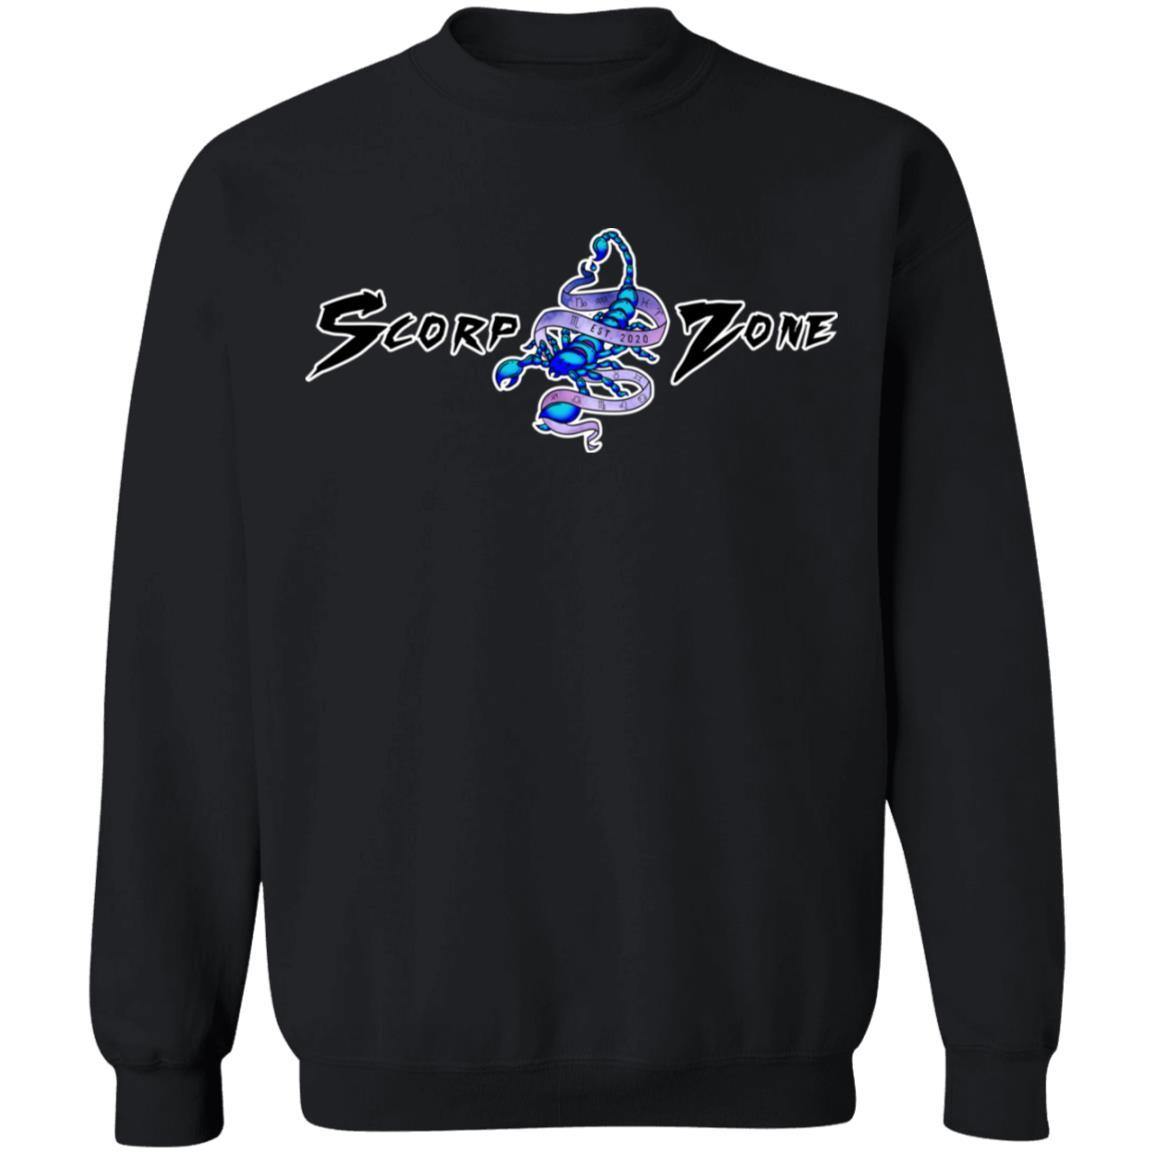 PISCES DESIGN ON BACK AND SMALL SCORP ZONE LOGO ON FRONT -Z65 Crewneck Pullover Sweatshirt - ScorpZone